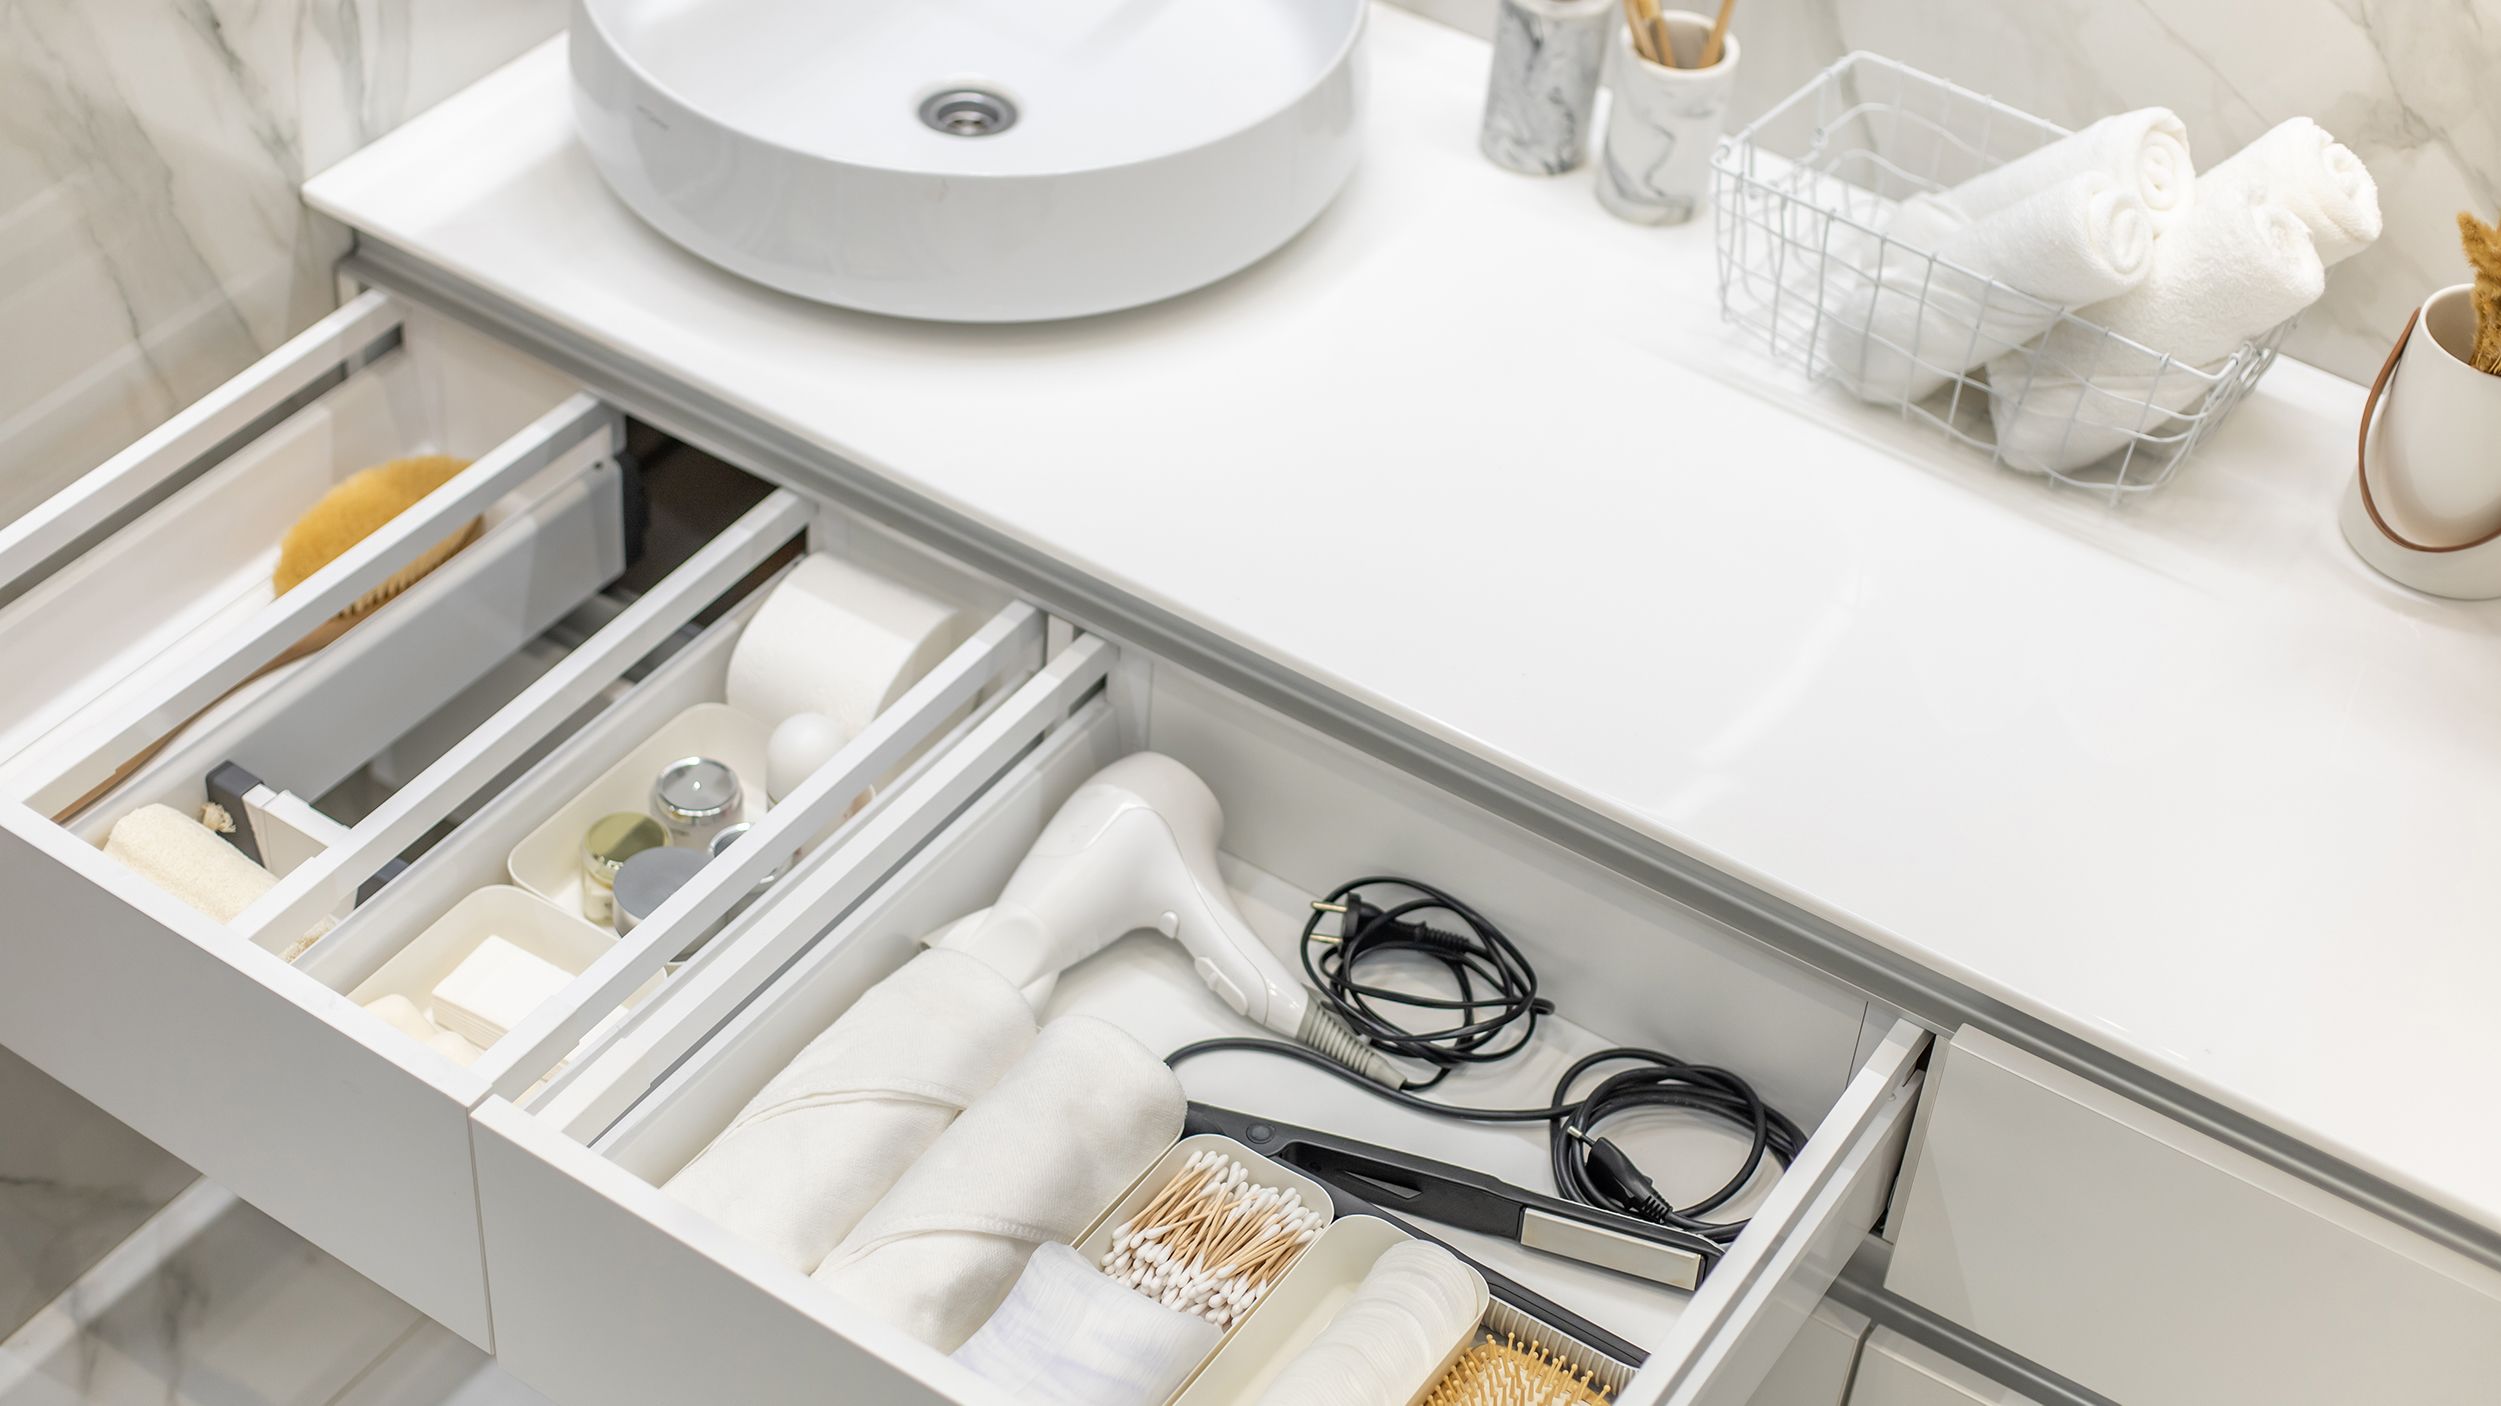 Wire Baskets Are Great Ways to Keep Your Bathroom and Kitchen Sink Cabinets Organized